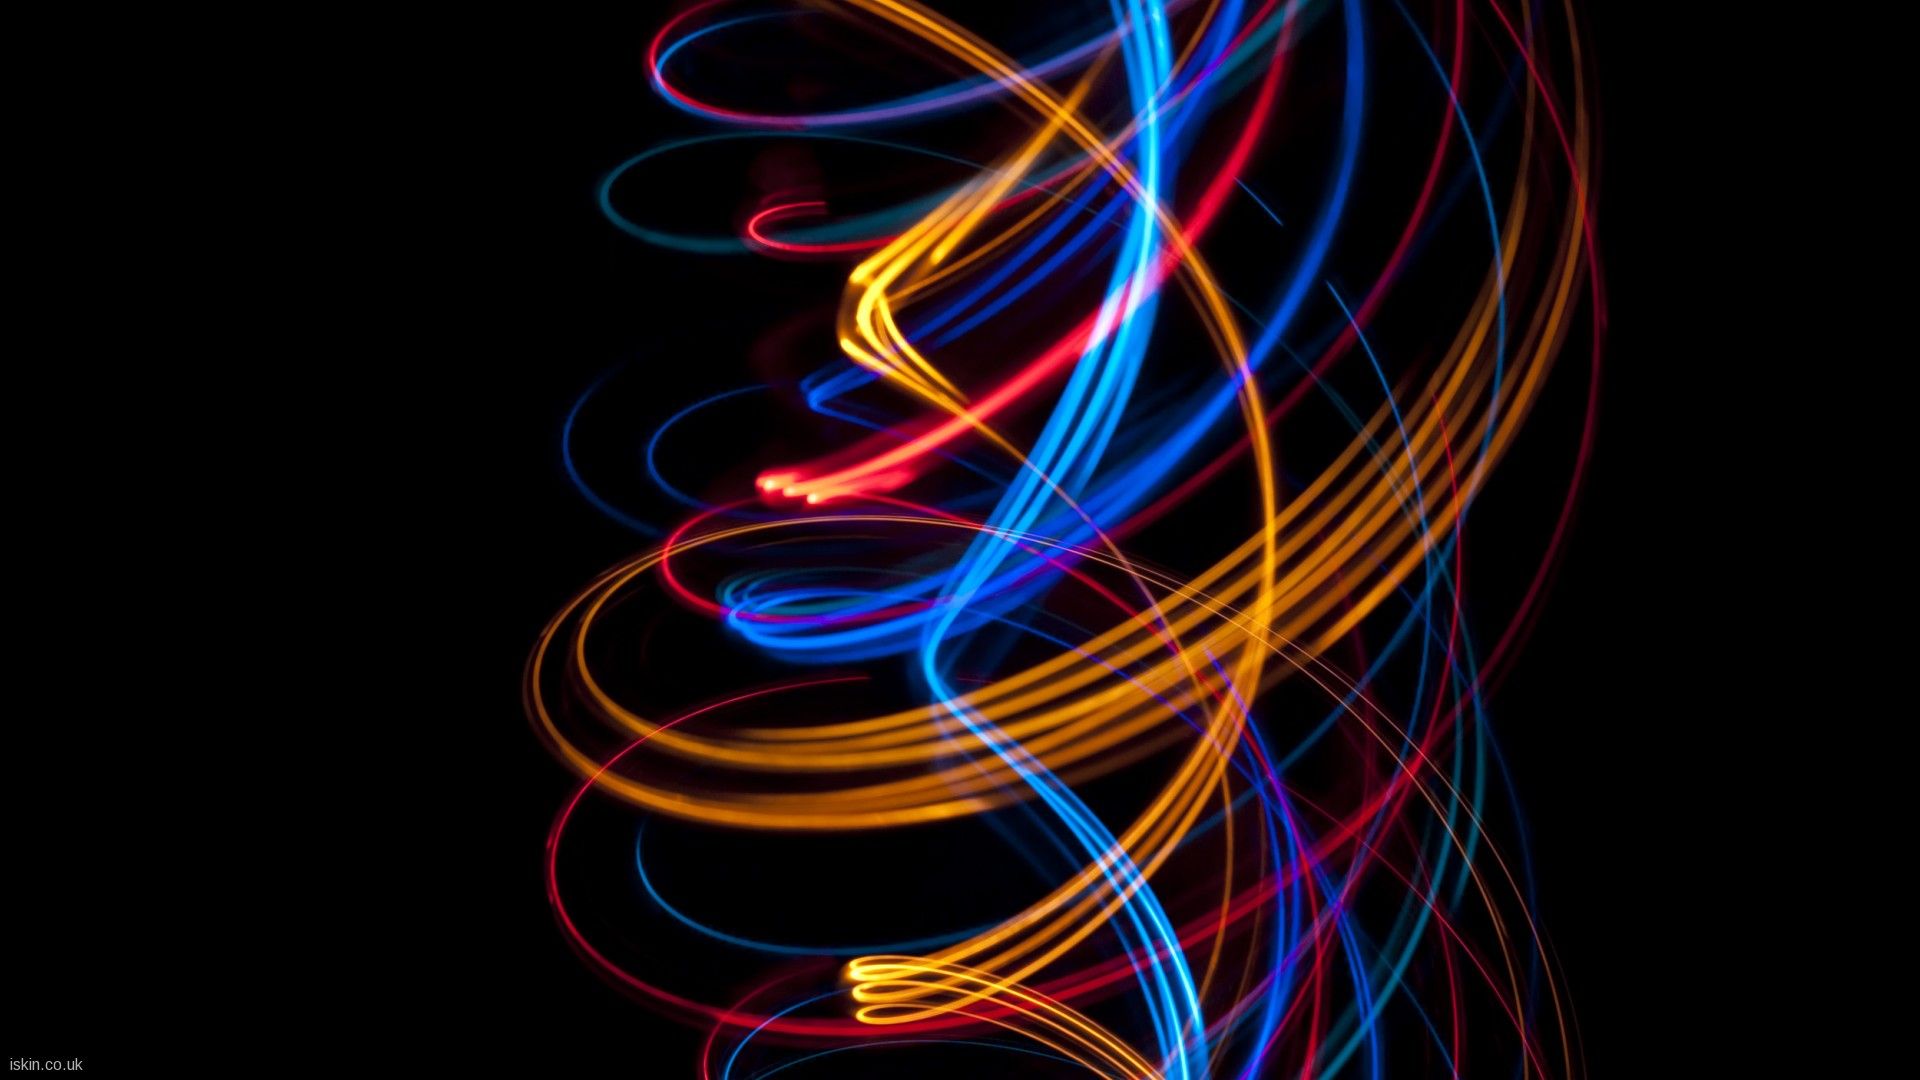 Stream Spiral Light Abstract Background Black wallpapers HD free